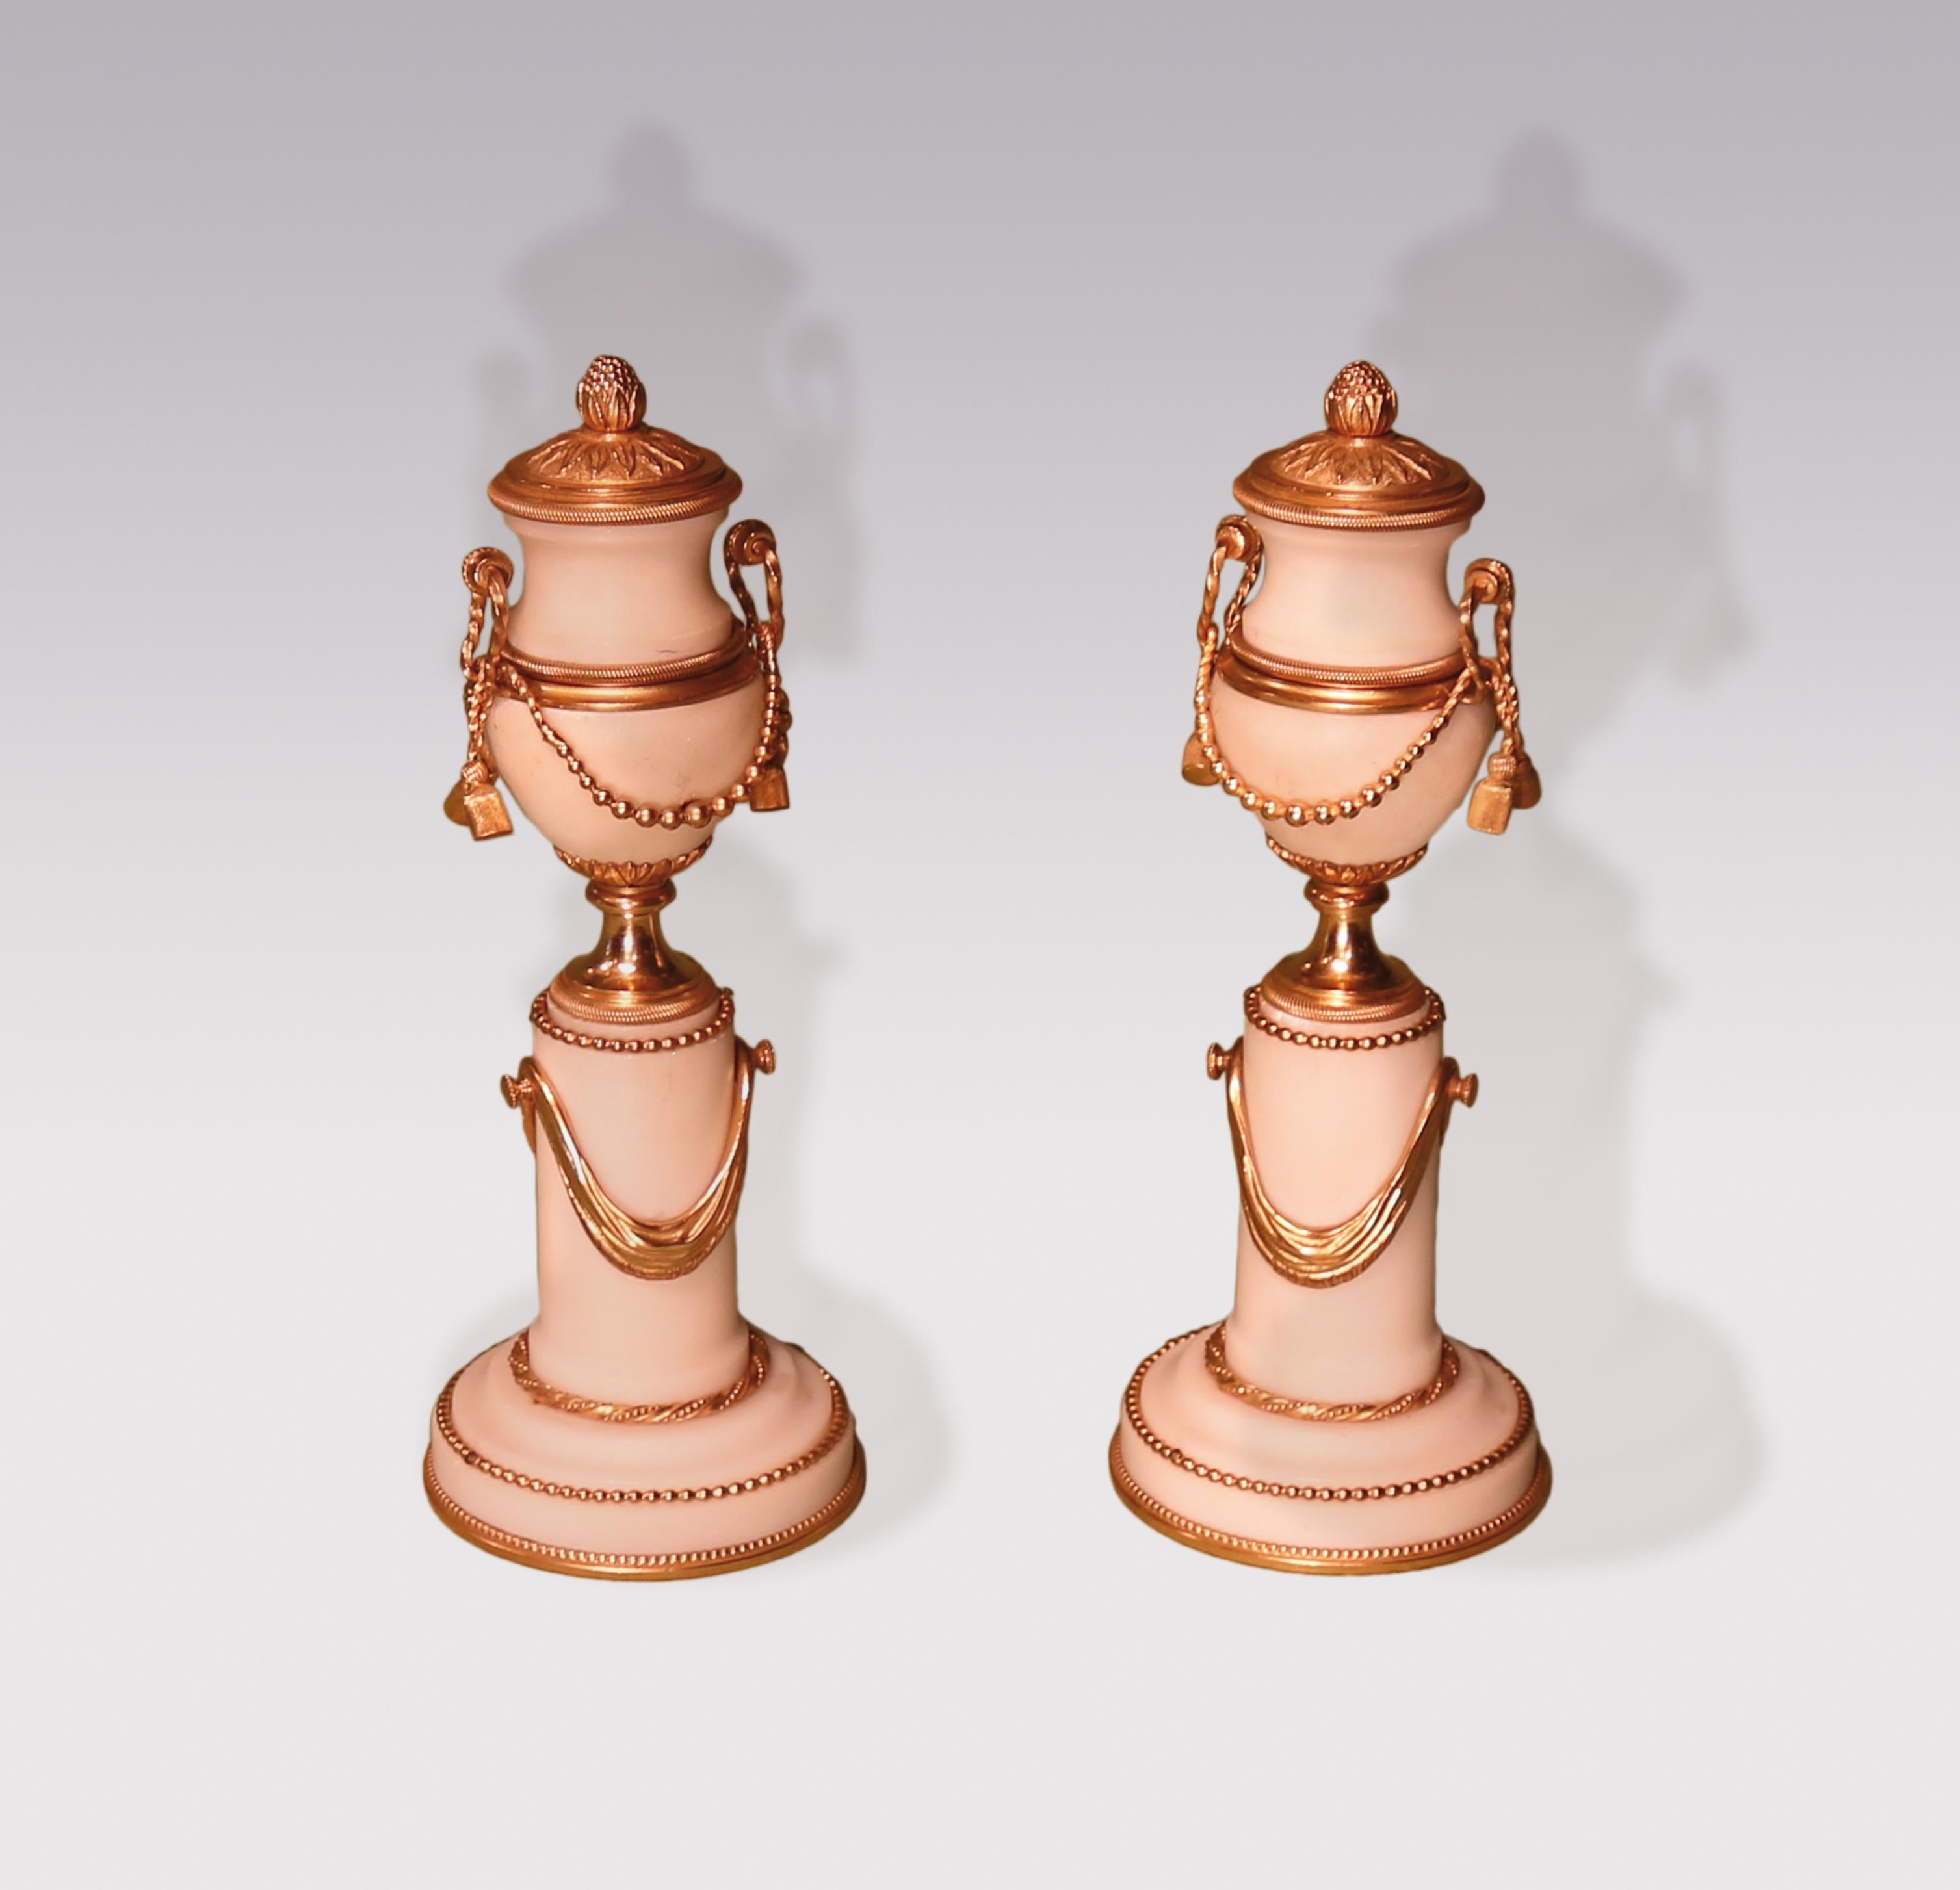 A pair of early 19th century white marble and ormolu cassolettes. Having pineapple finial lids converting to candle holders, decorated with beaded swags with tassels, supported on columns with applied swags, ending on circular bases.